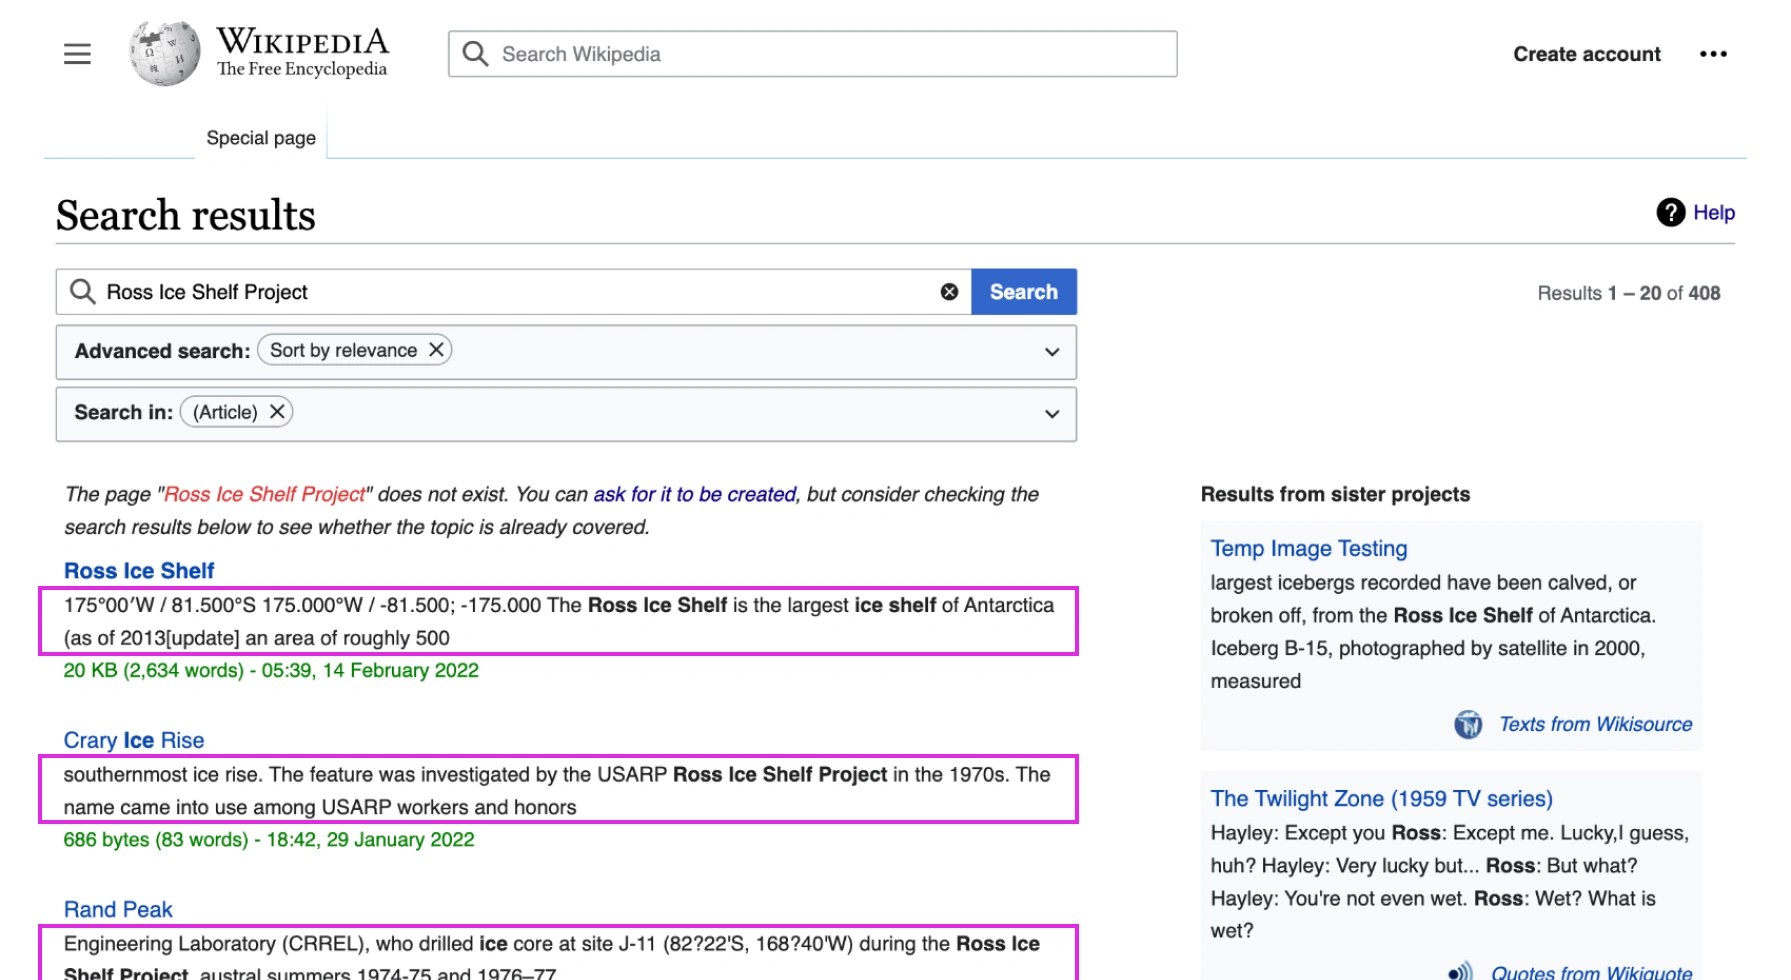 Screenshot of Wikipedia highlighting snippets in the search results on search page